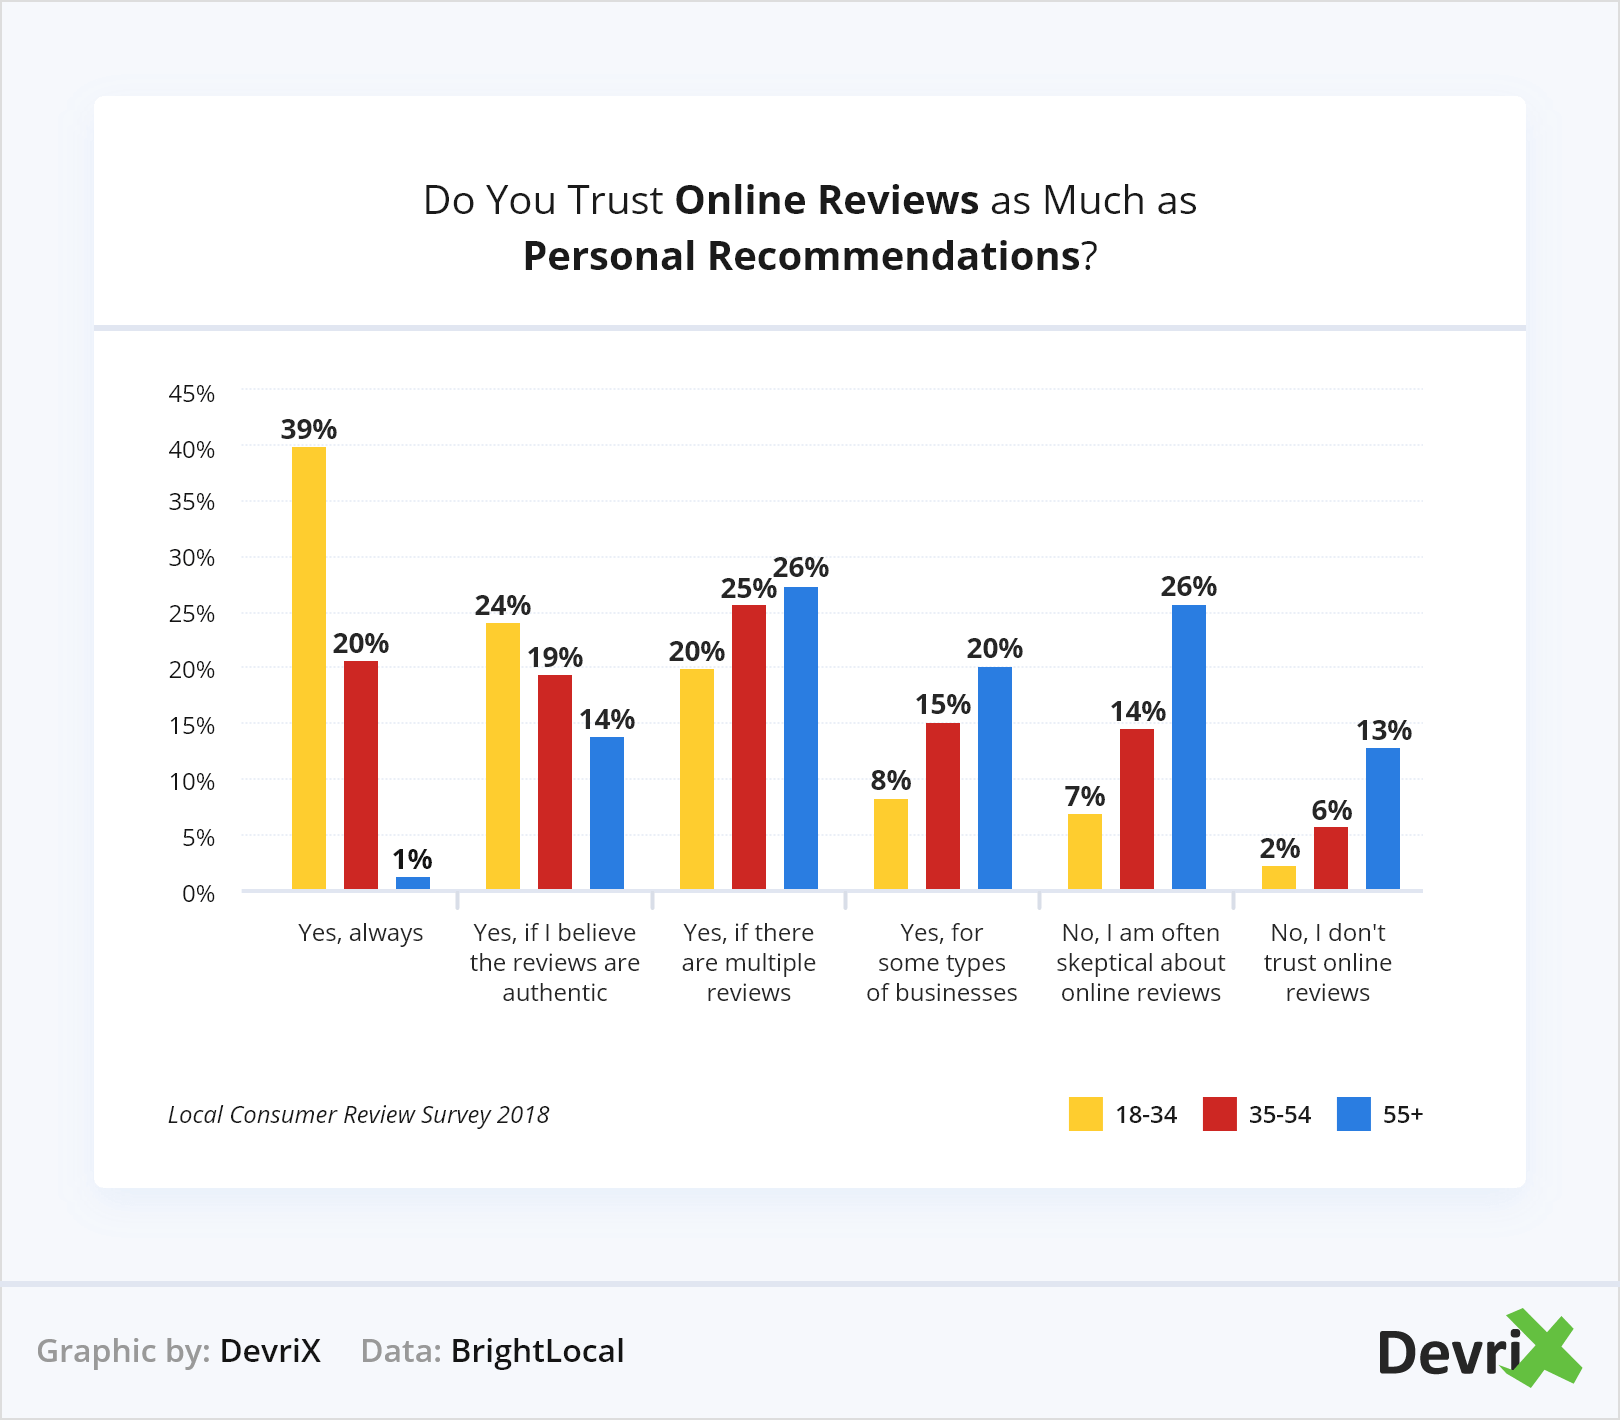 Do You Trust Online Reviews as Much as Personal Recommendations